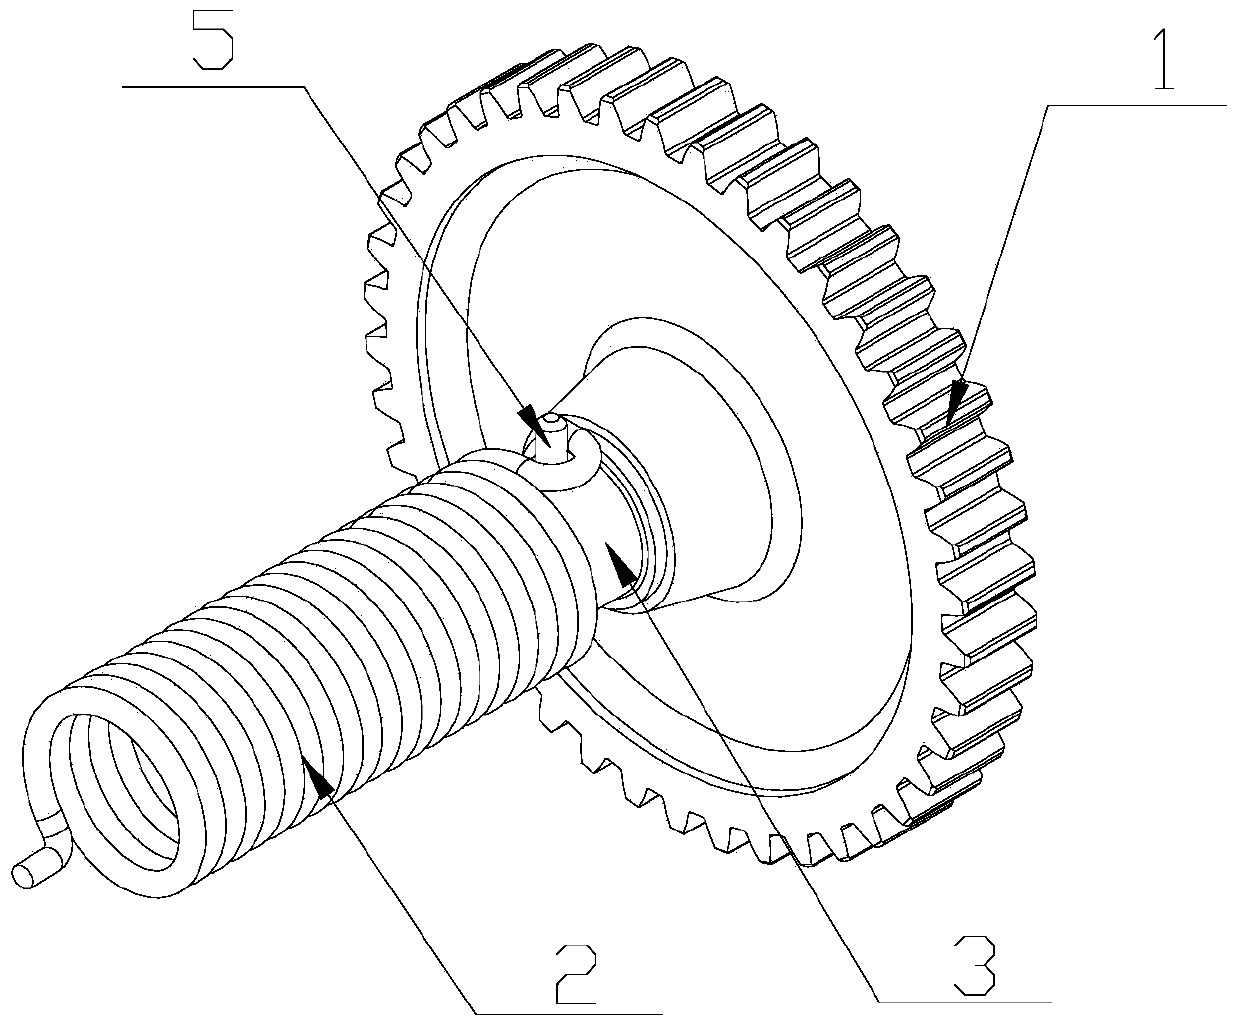 Starting gear structure on motorcycle starting shaft